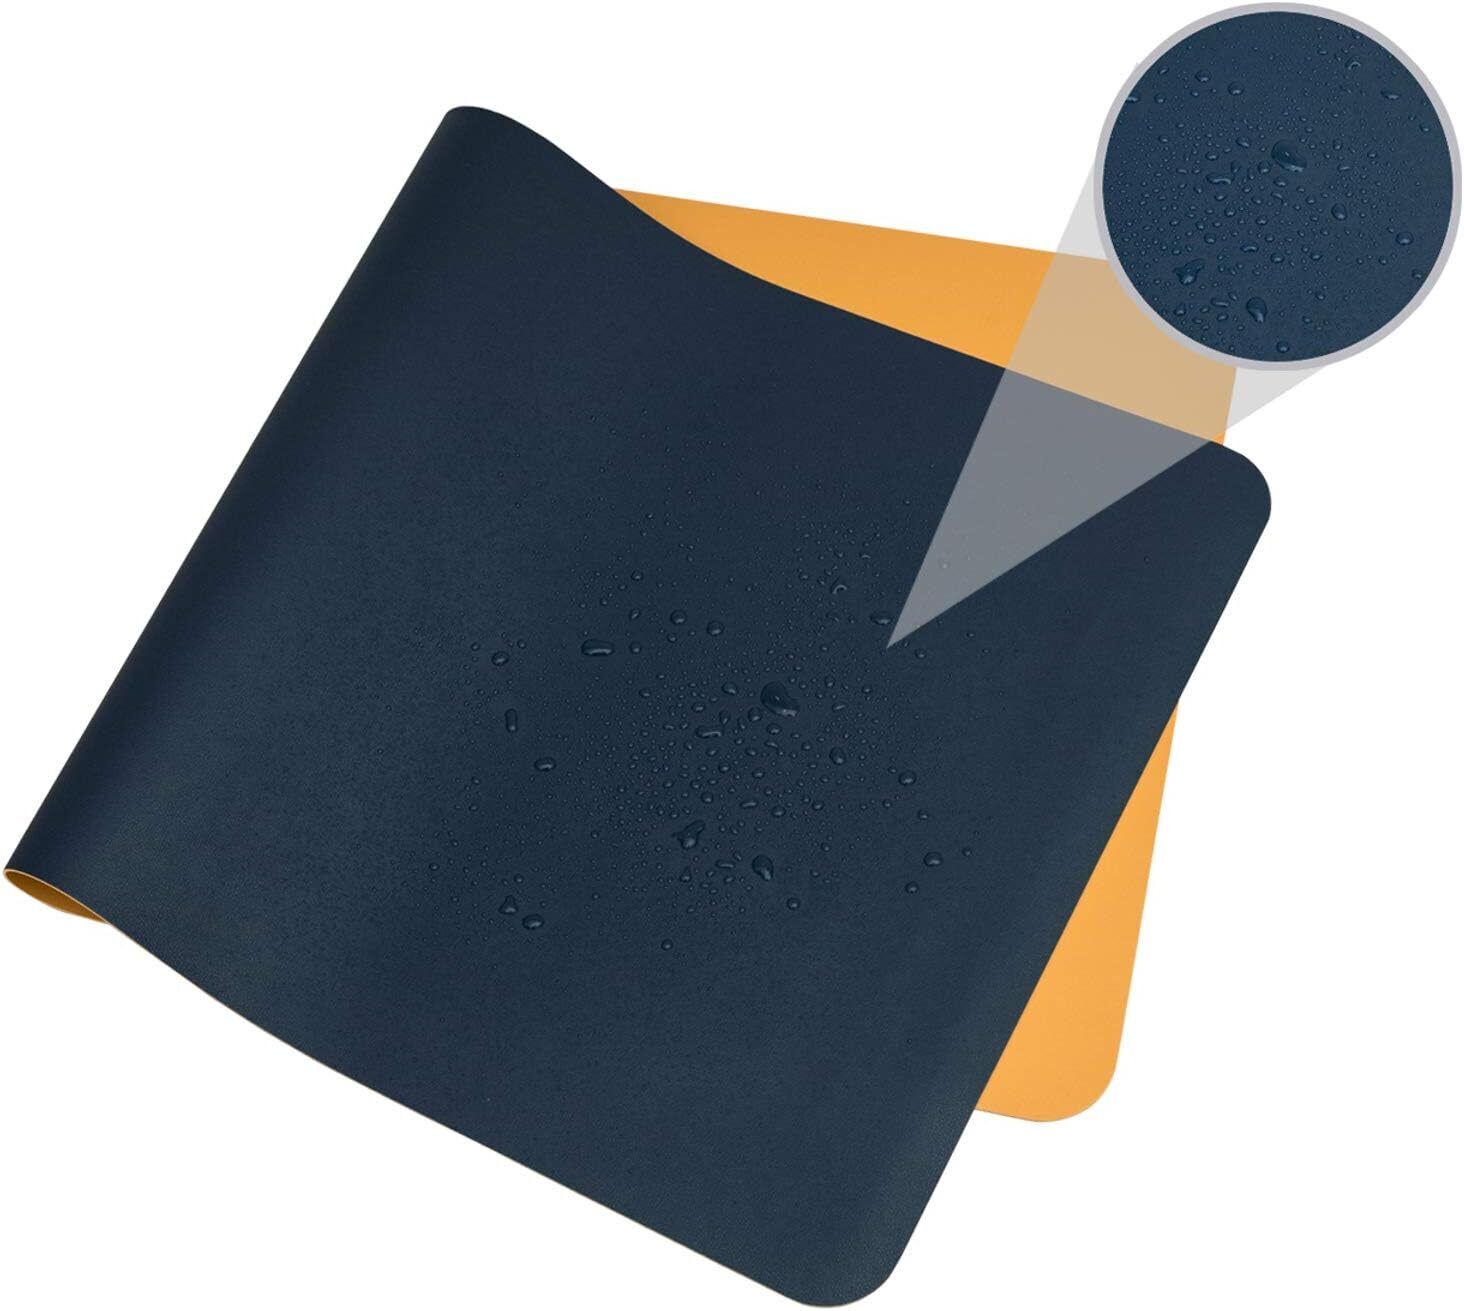 Dual Sided Desk Pad Protector For Office Waterproof 80cm x 40cm Blue & Yellow - RLO Tech